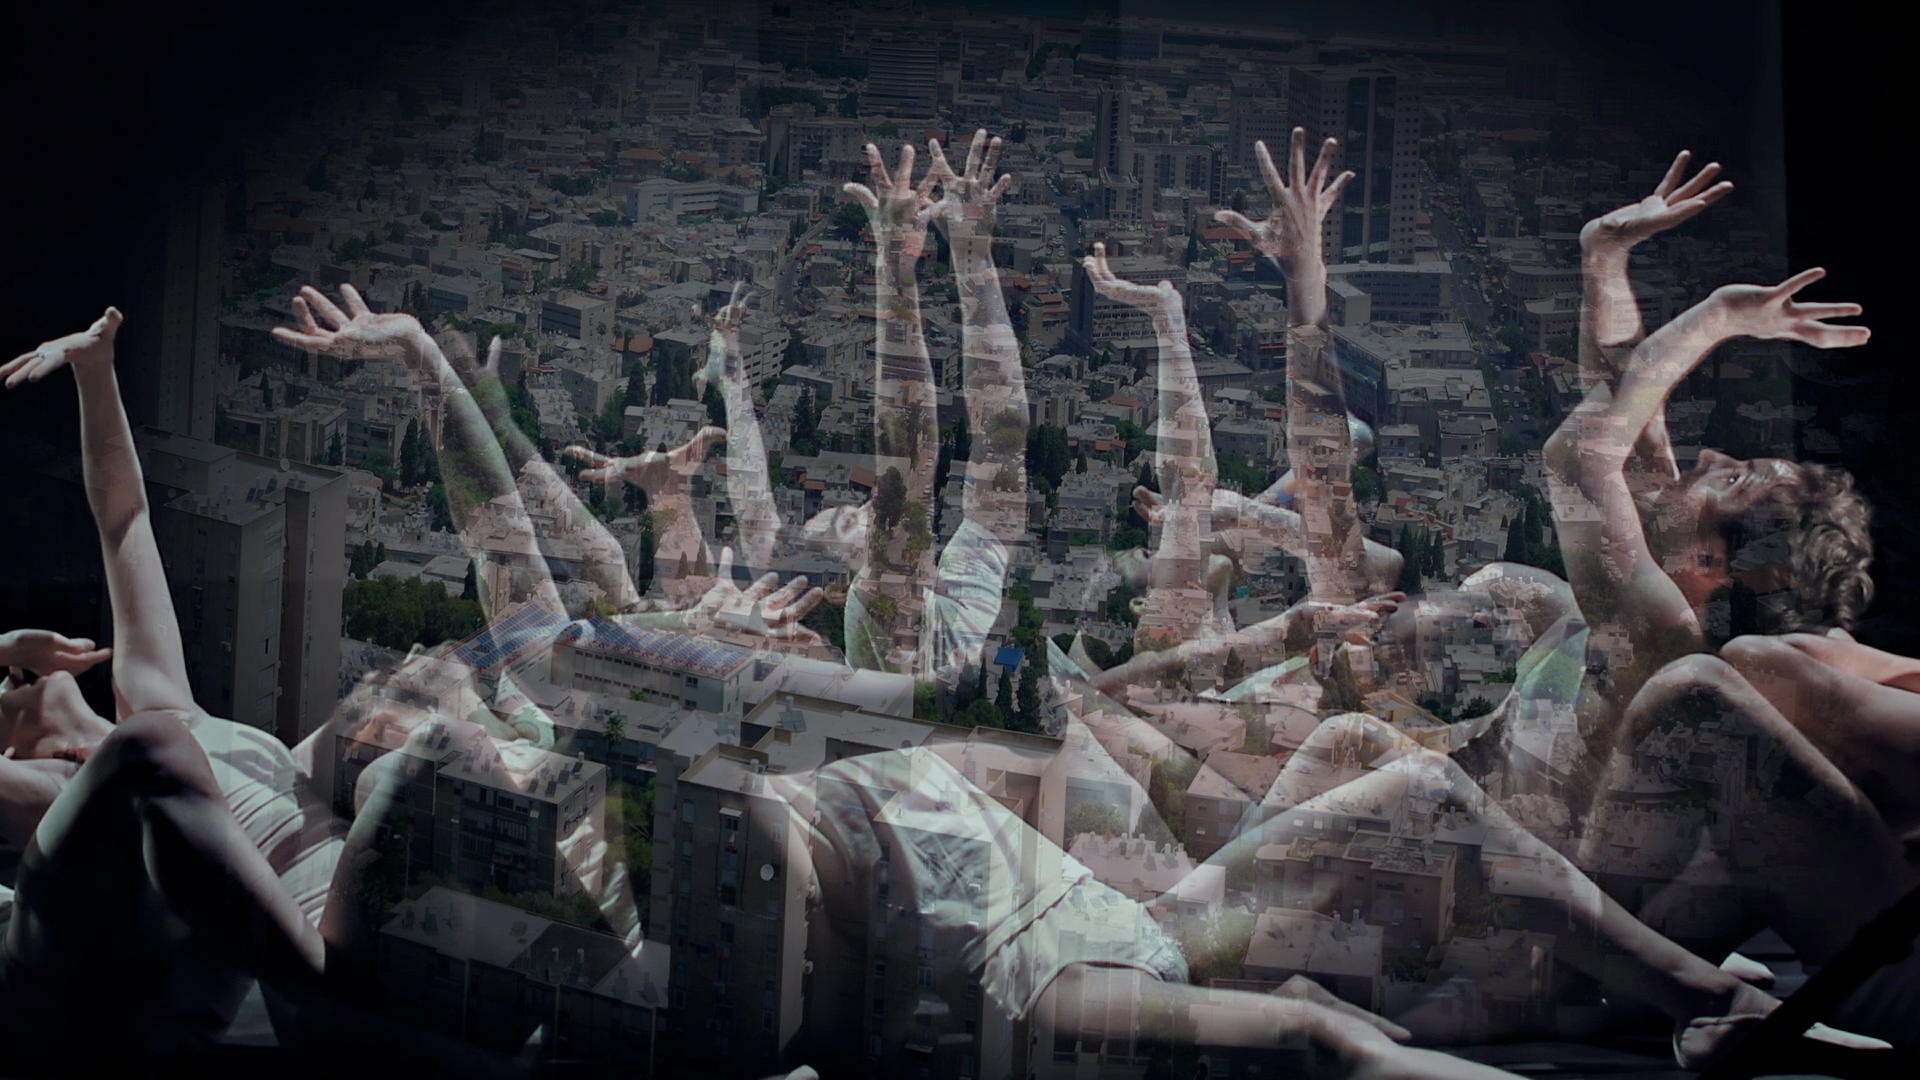 A group of dancers on the floor looking and reaching up with outstretched hands.